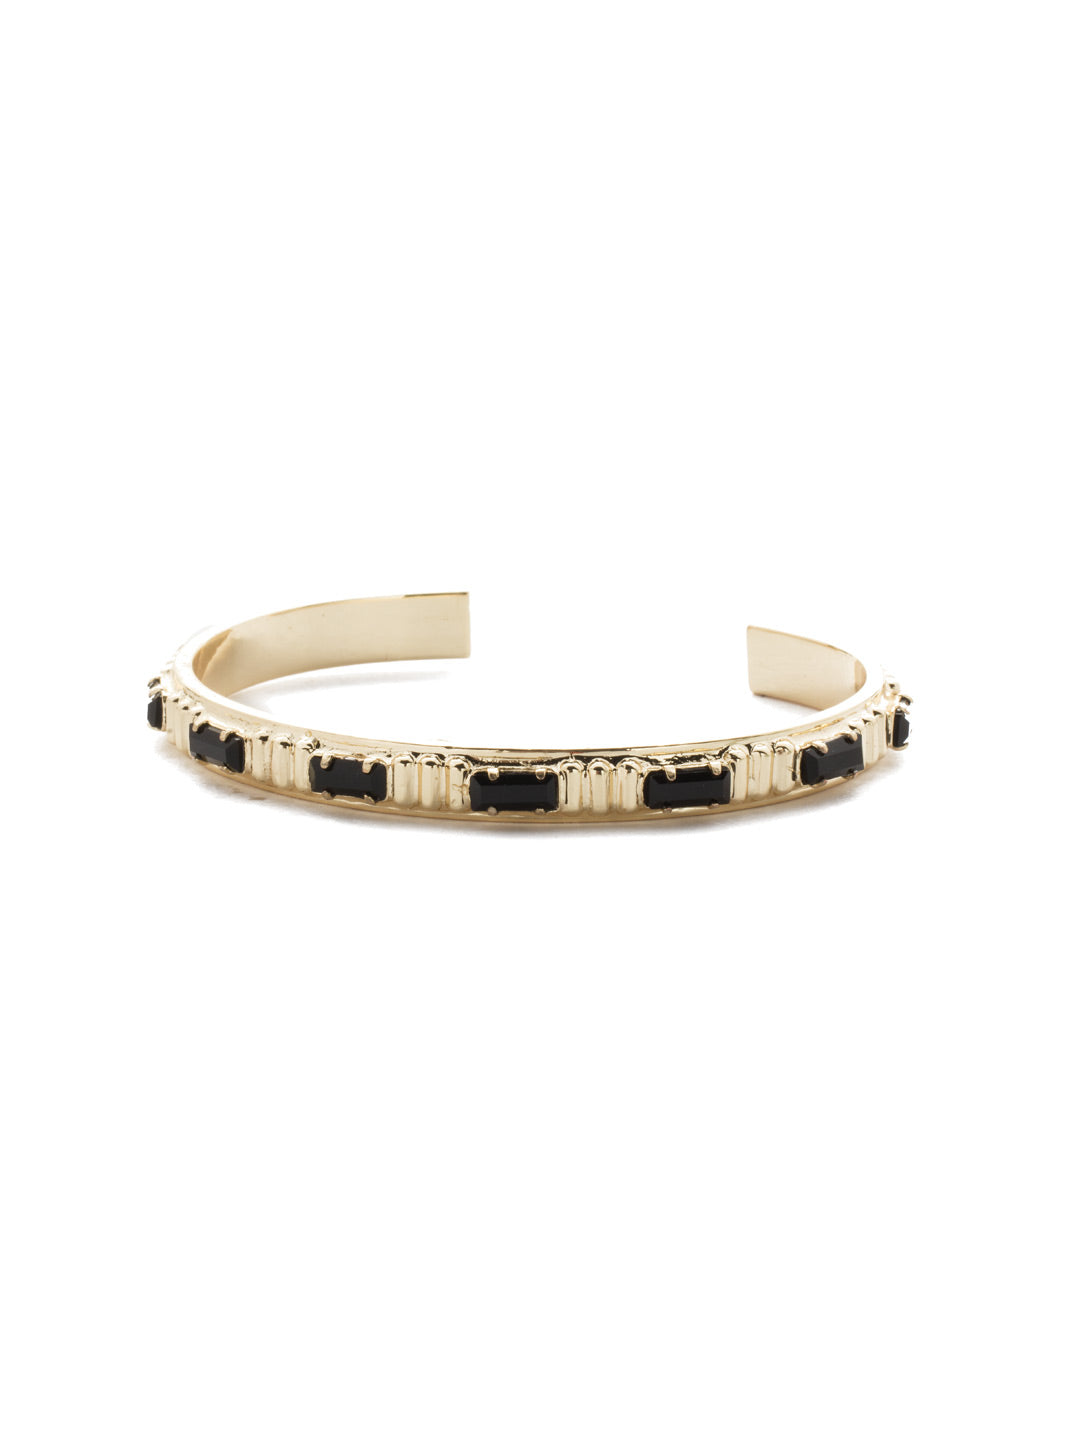 Eira Cuff Bracelet - BEF3BGJET - A unique design of pressed metal set with baguette crystals is sure to bring a timeless flair to any look and is conveniently made with a slip-on style.